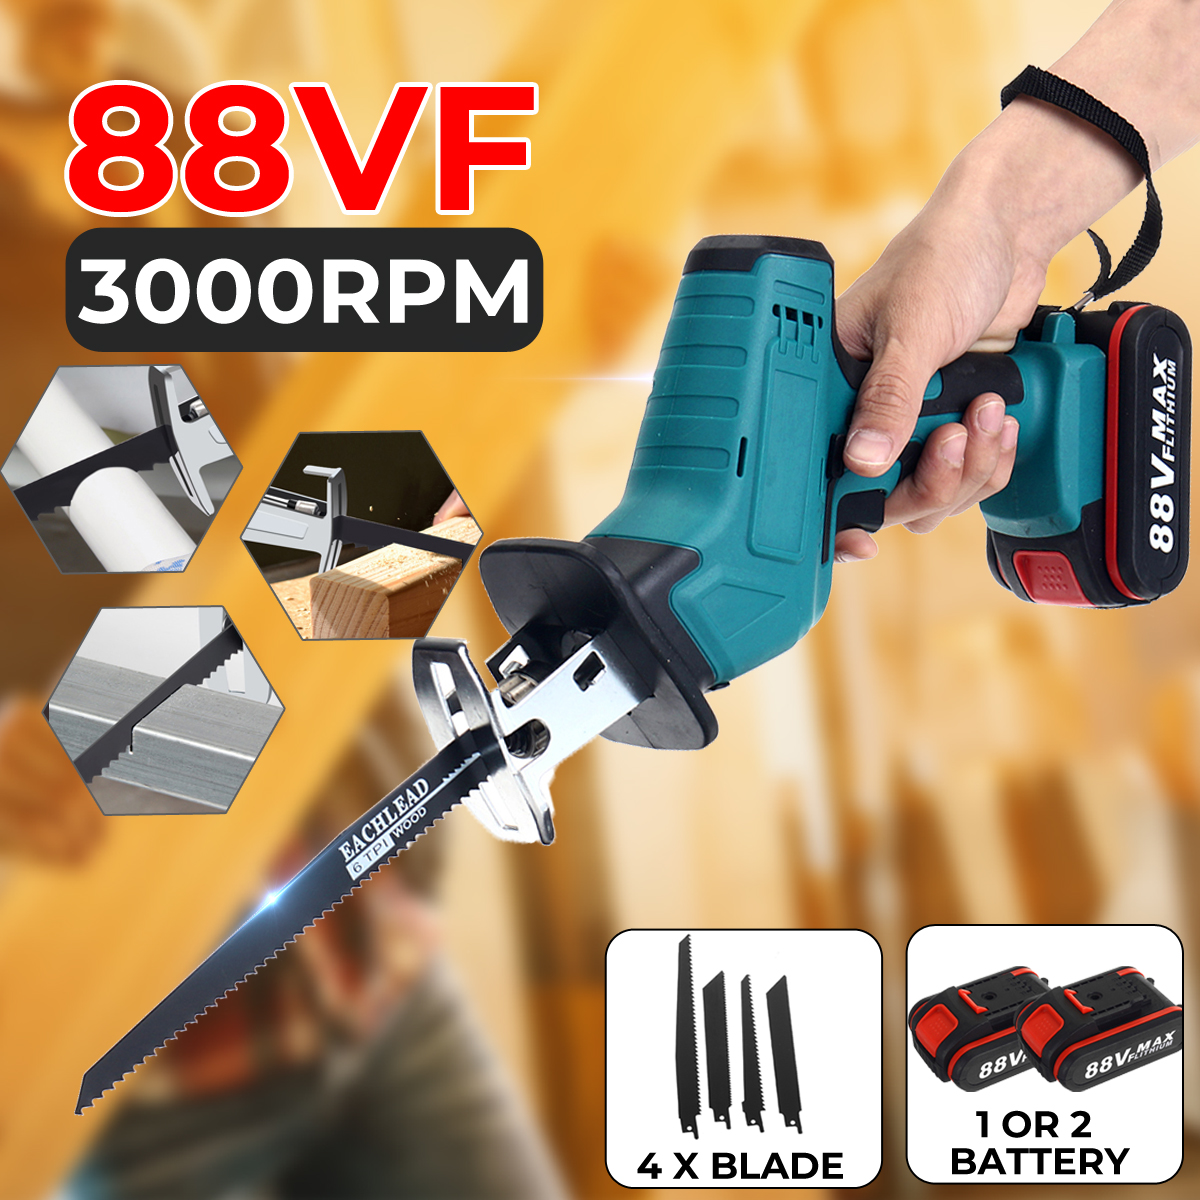 88VF-Cordless-Electric-Reciprocating-Saw-Garden-Wood-Cutting-Pruning-Saw-1761115-1